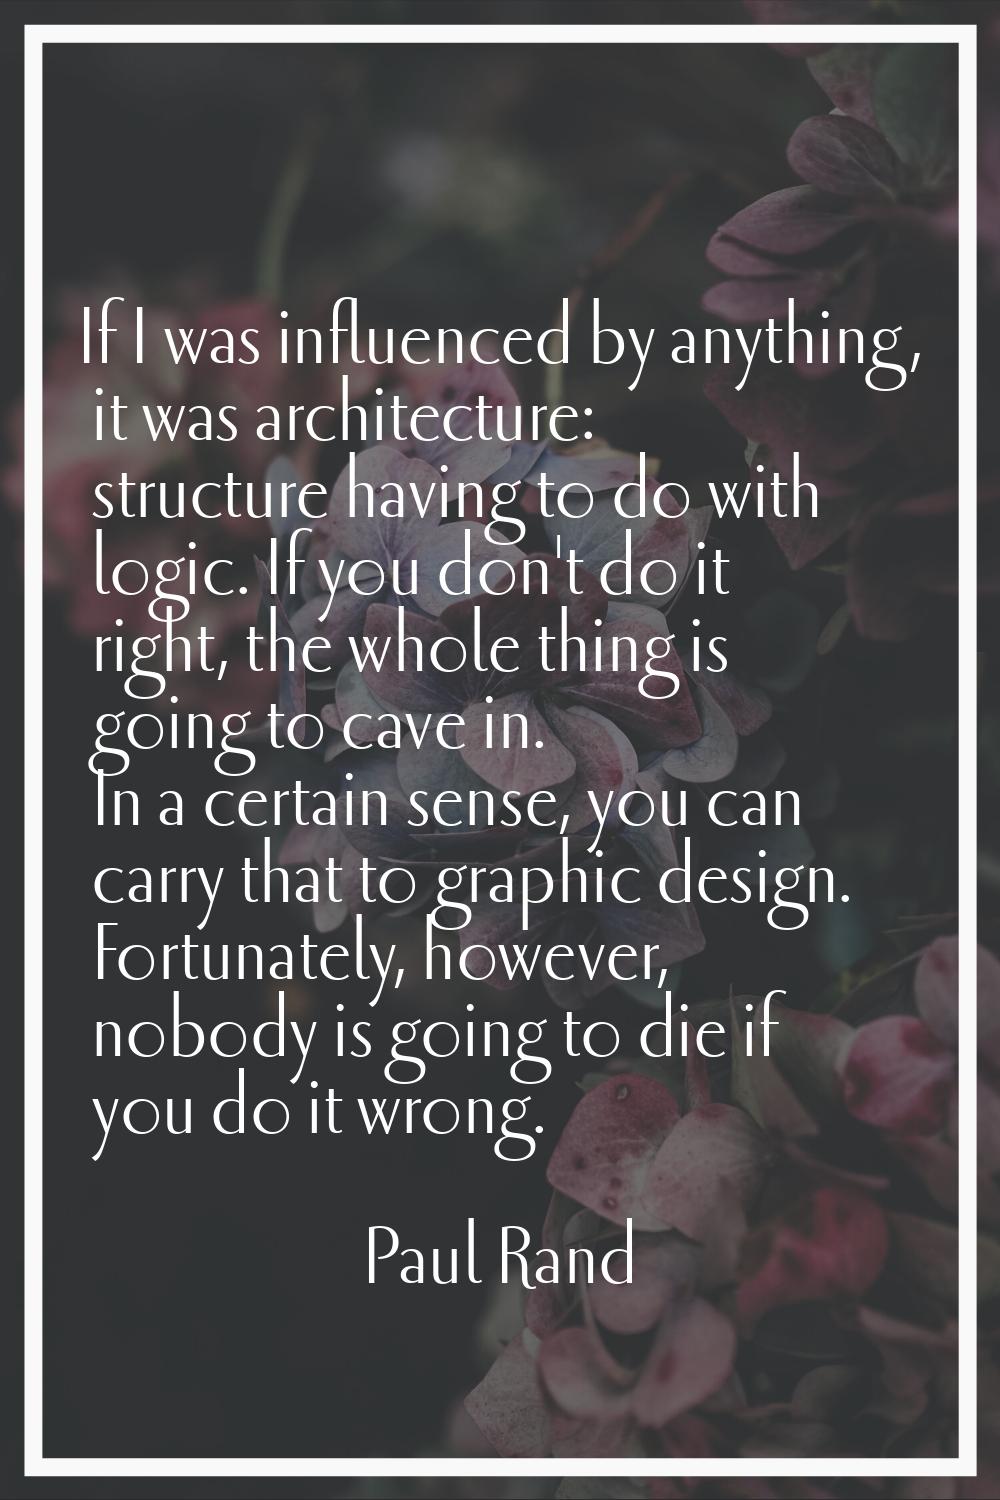 If I was influenced by anything, it was architecture: structure having to do with logic. If you don